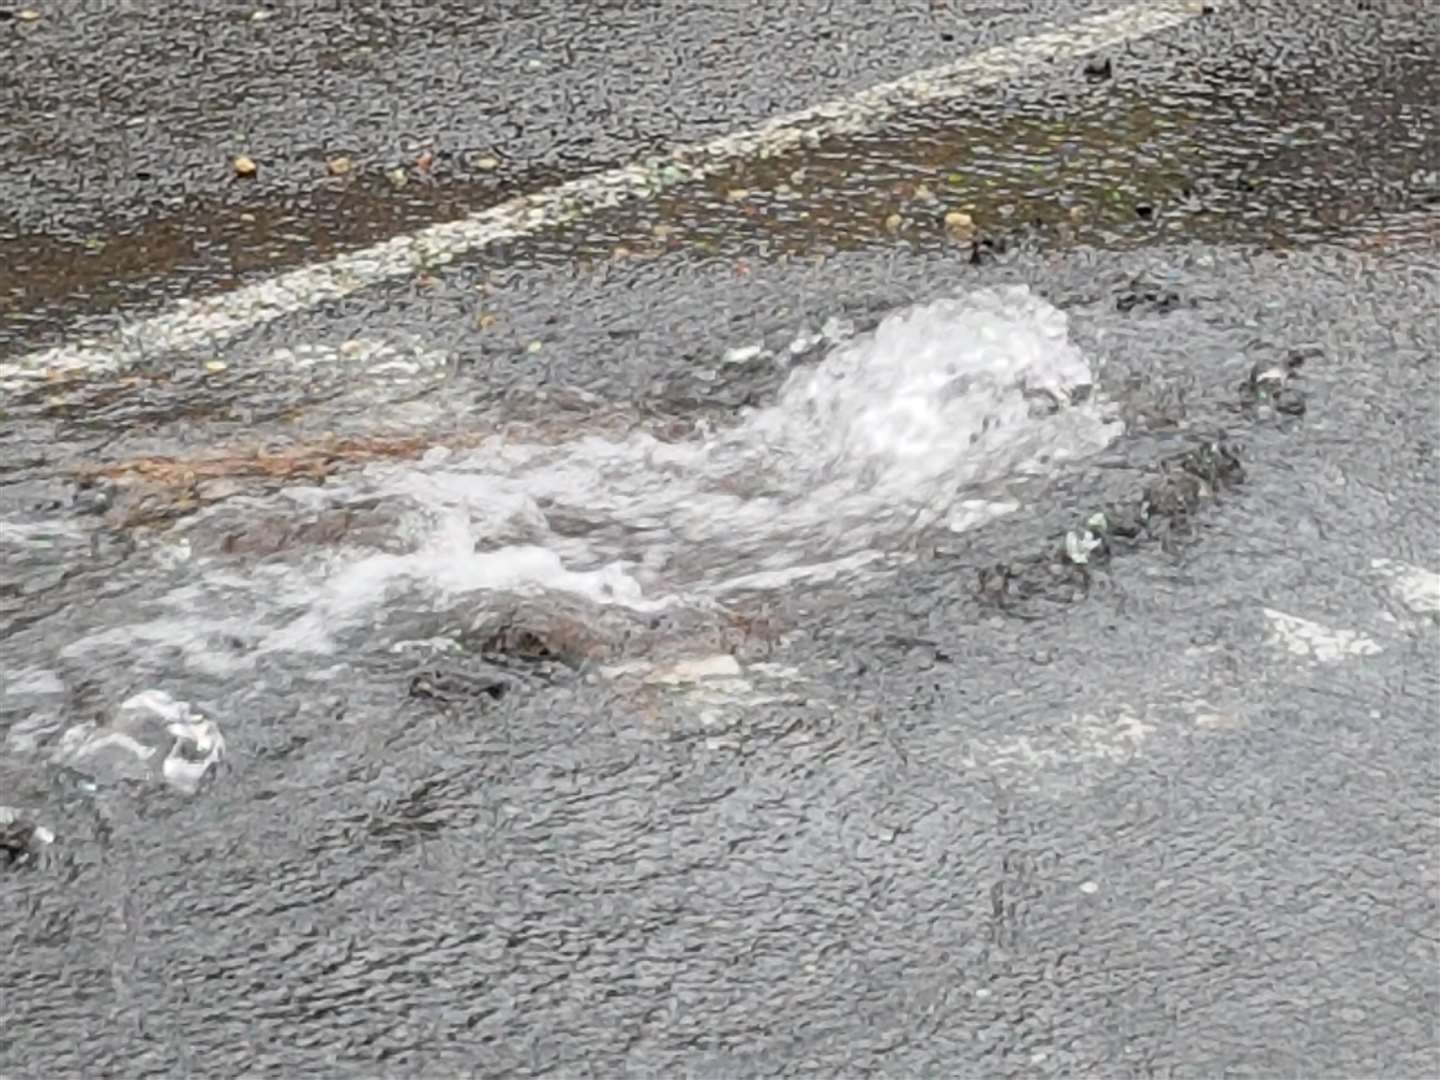 Water was pictured spewing out of the pipe (3549028)